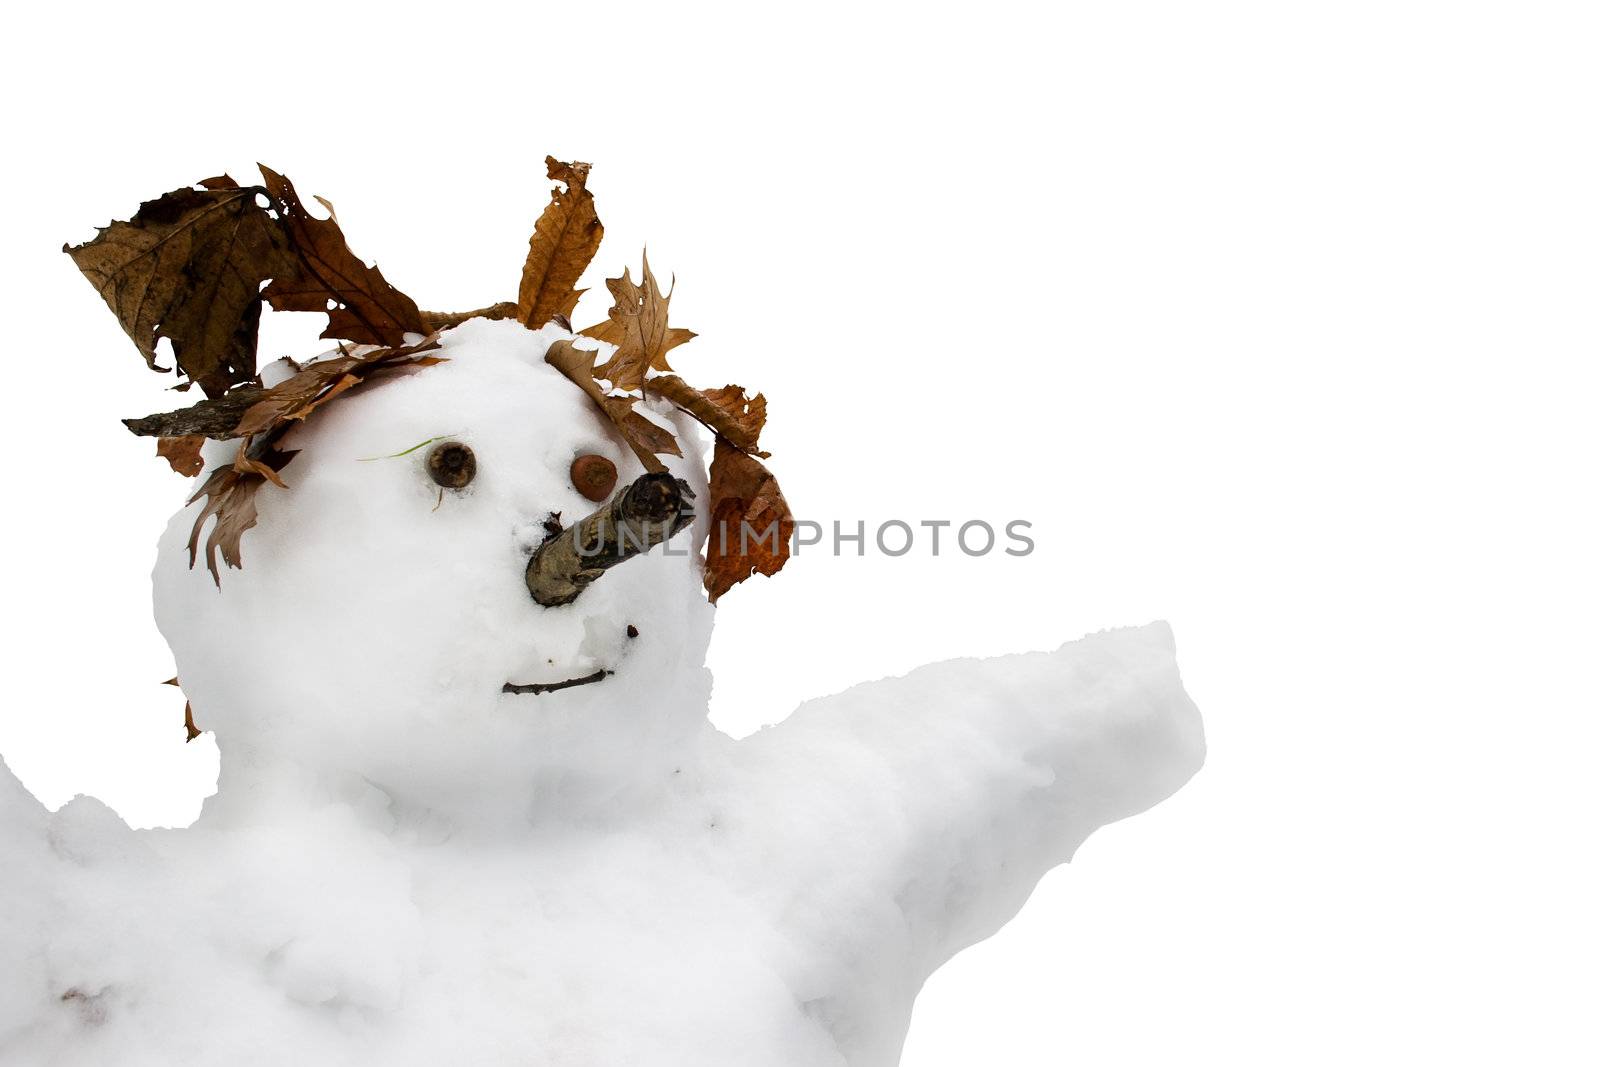 Snowman isolated on white. Clipping path included.